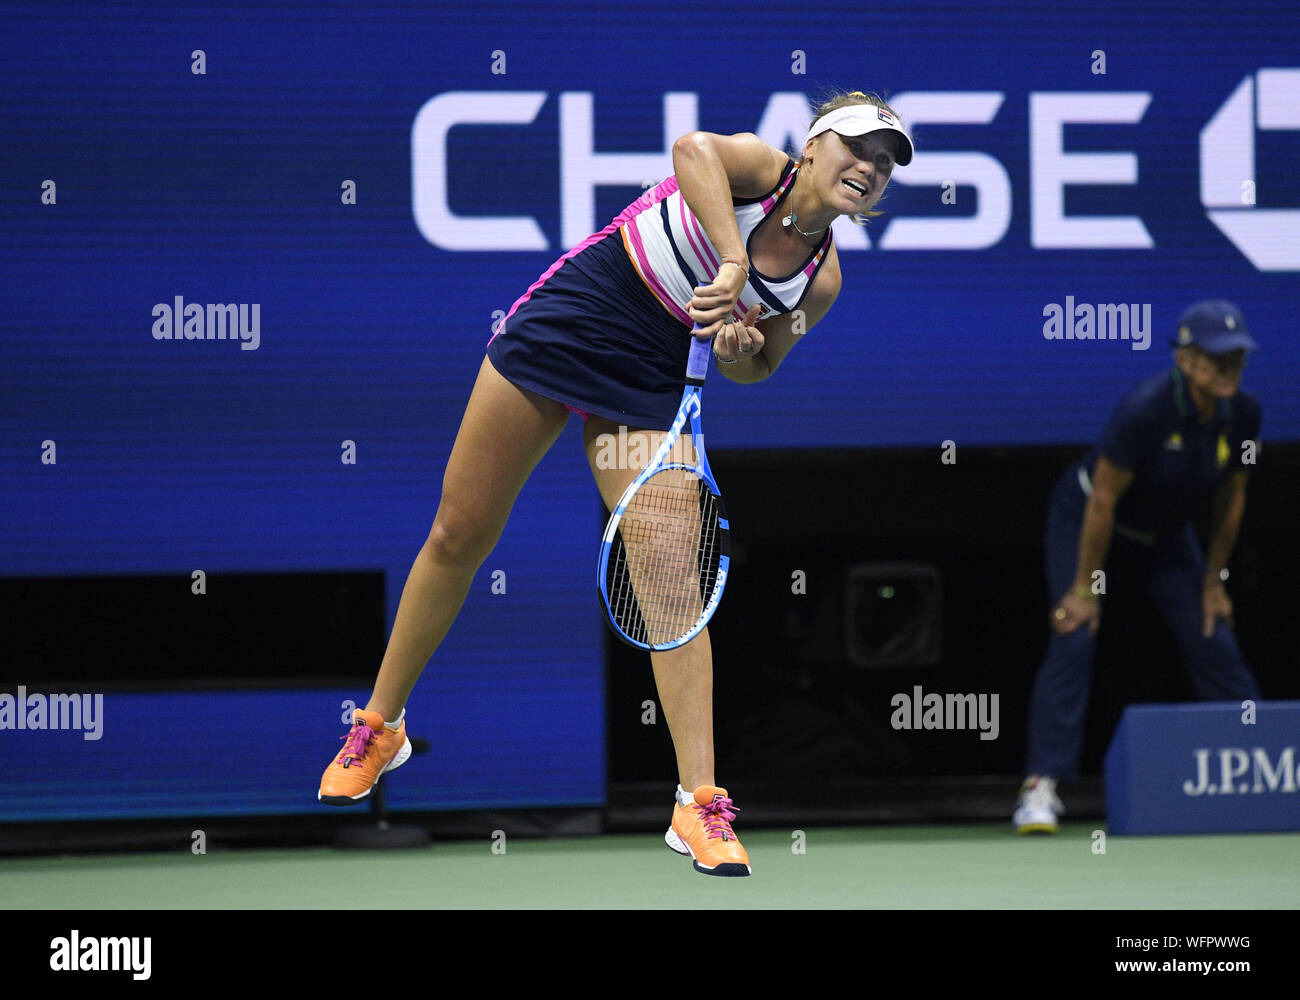 30th August 2019; Billie Jean King Tennis Center, New York, USA;    Sofia Kenin (USA) hitting a serve during her 3rd round match in the women's singles championship's at the US Open on August 30, 2019 Stock Photo